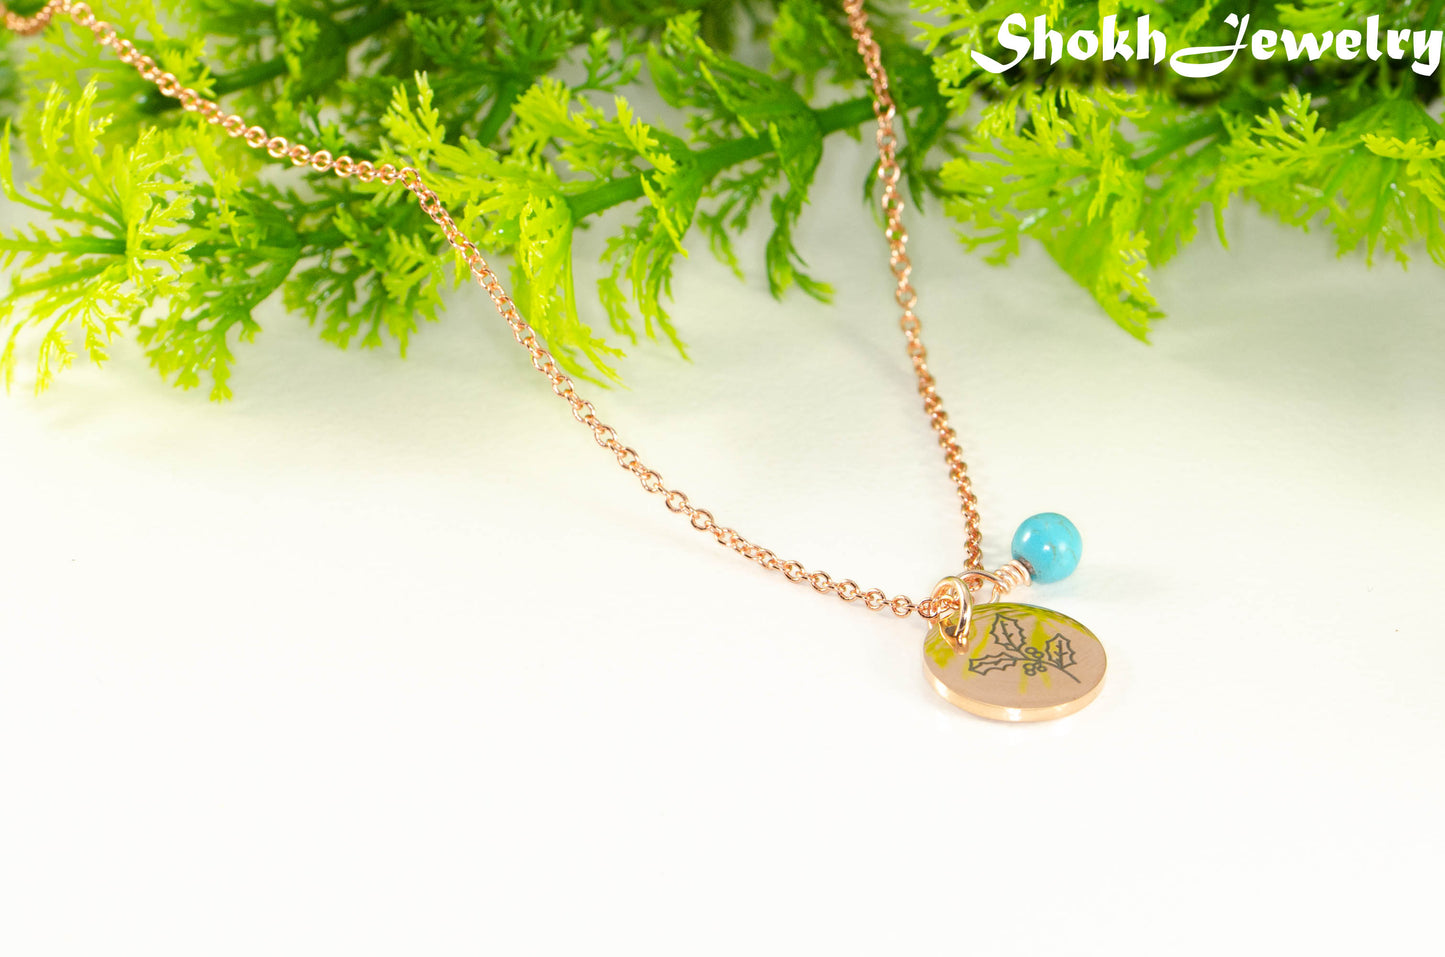 Close up of Rose Gold Plated December Birth Flower Necklace with Turquoise Howlite Birthstone Pendant.